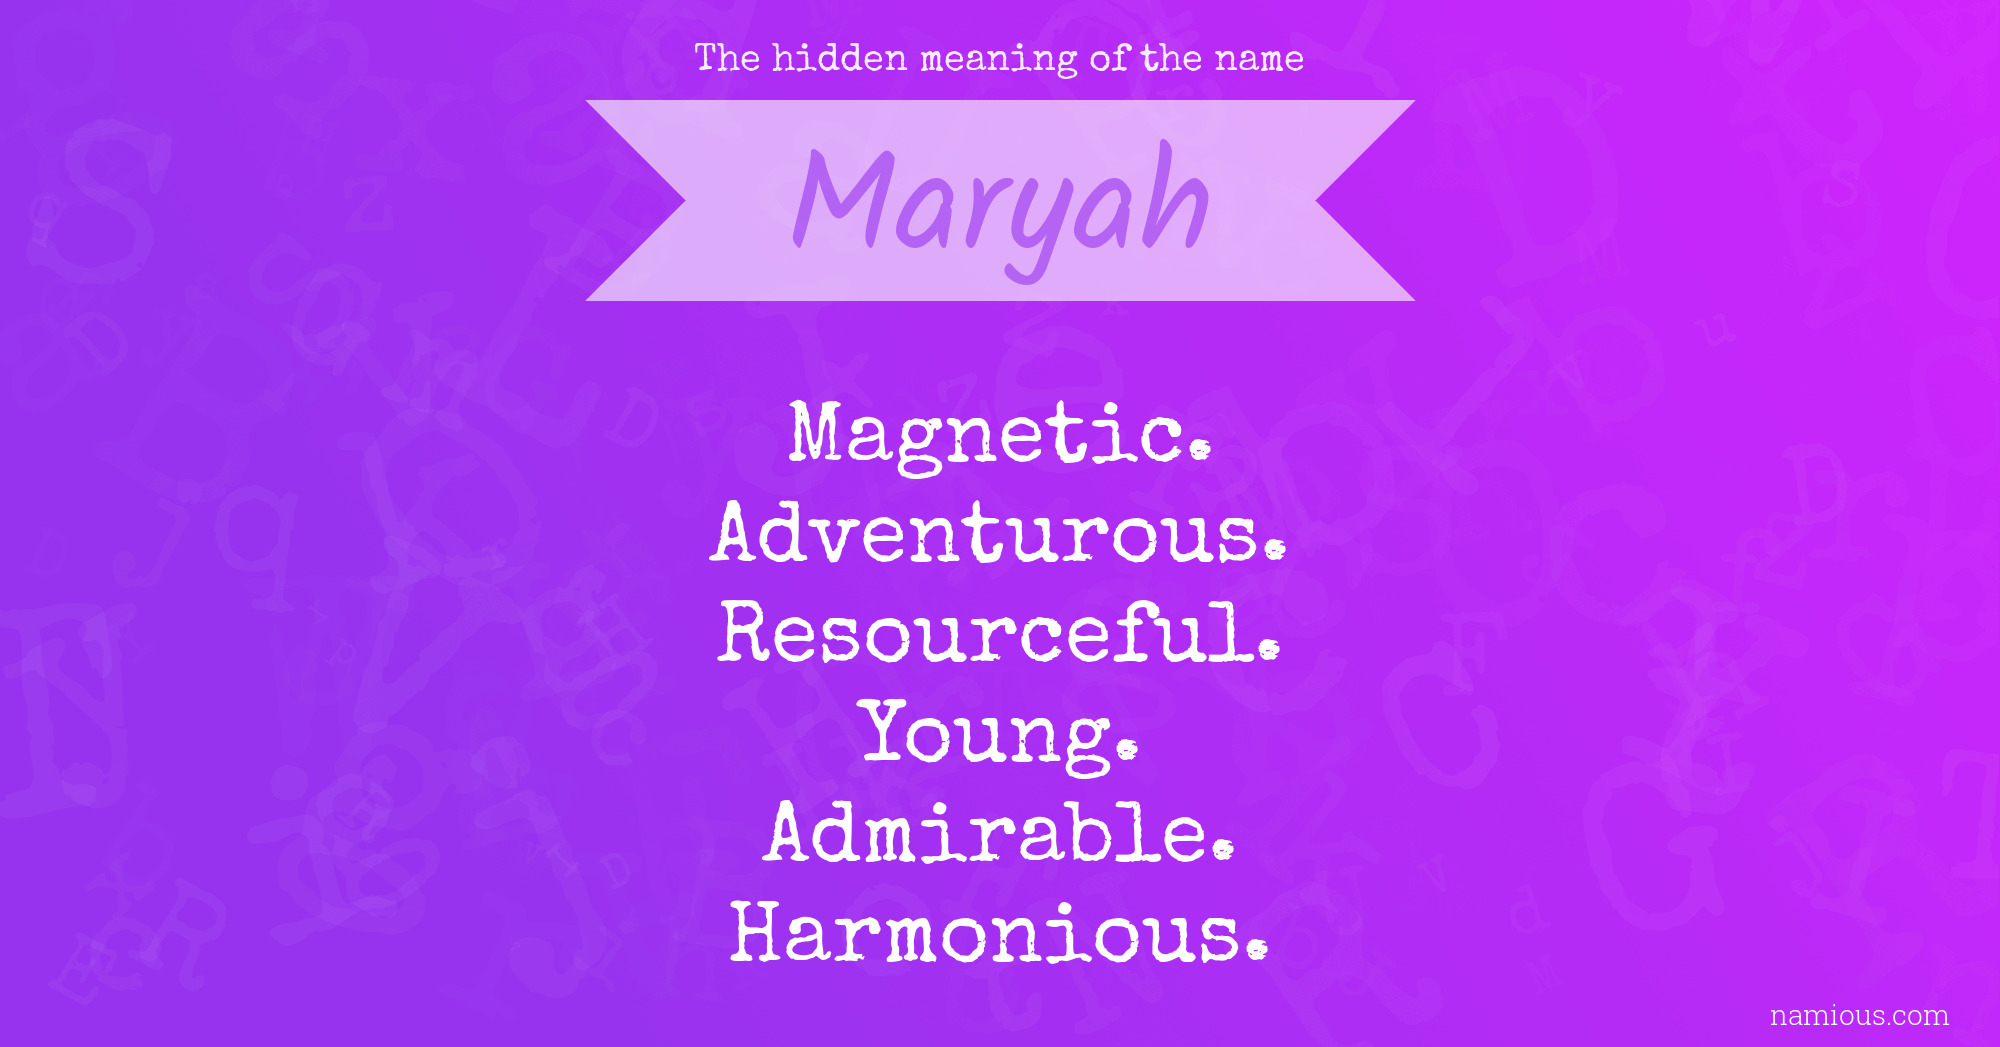 The hidden meaning of the name Maryah